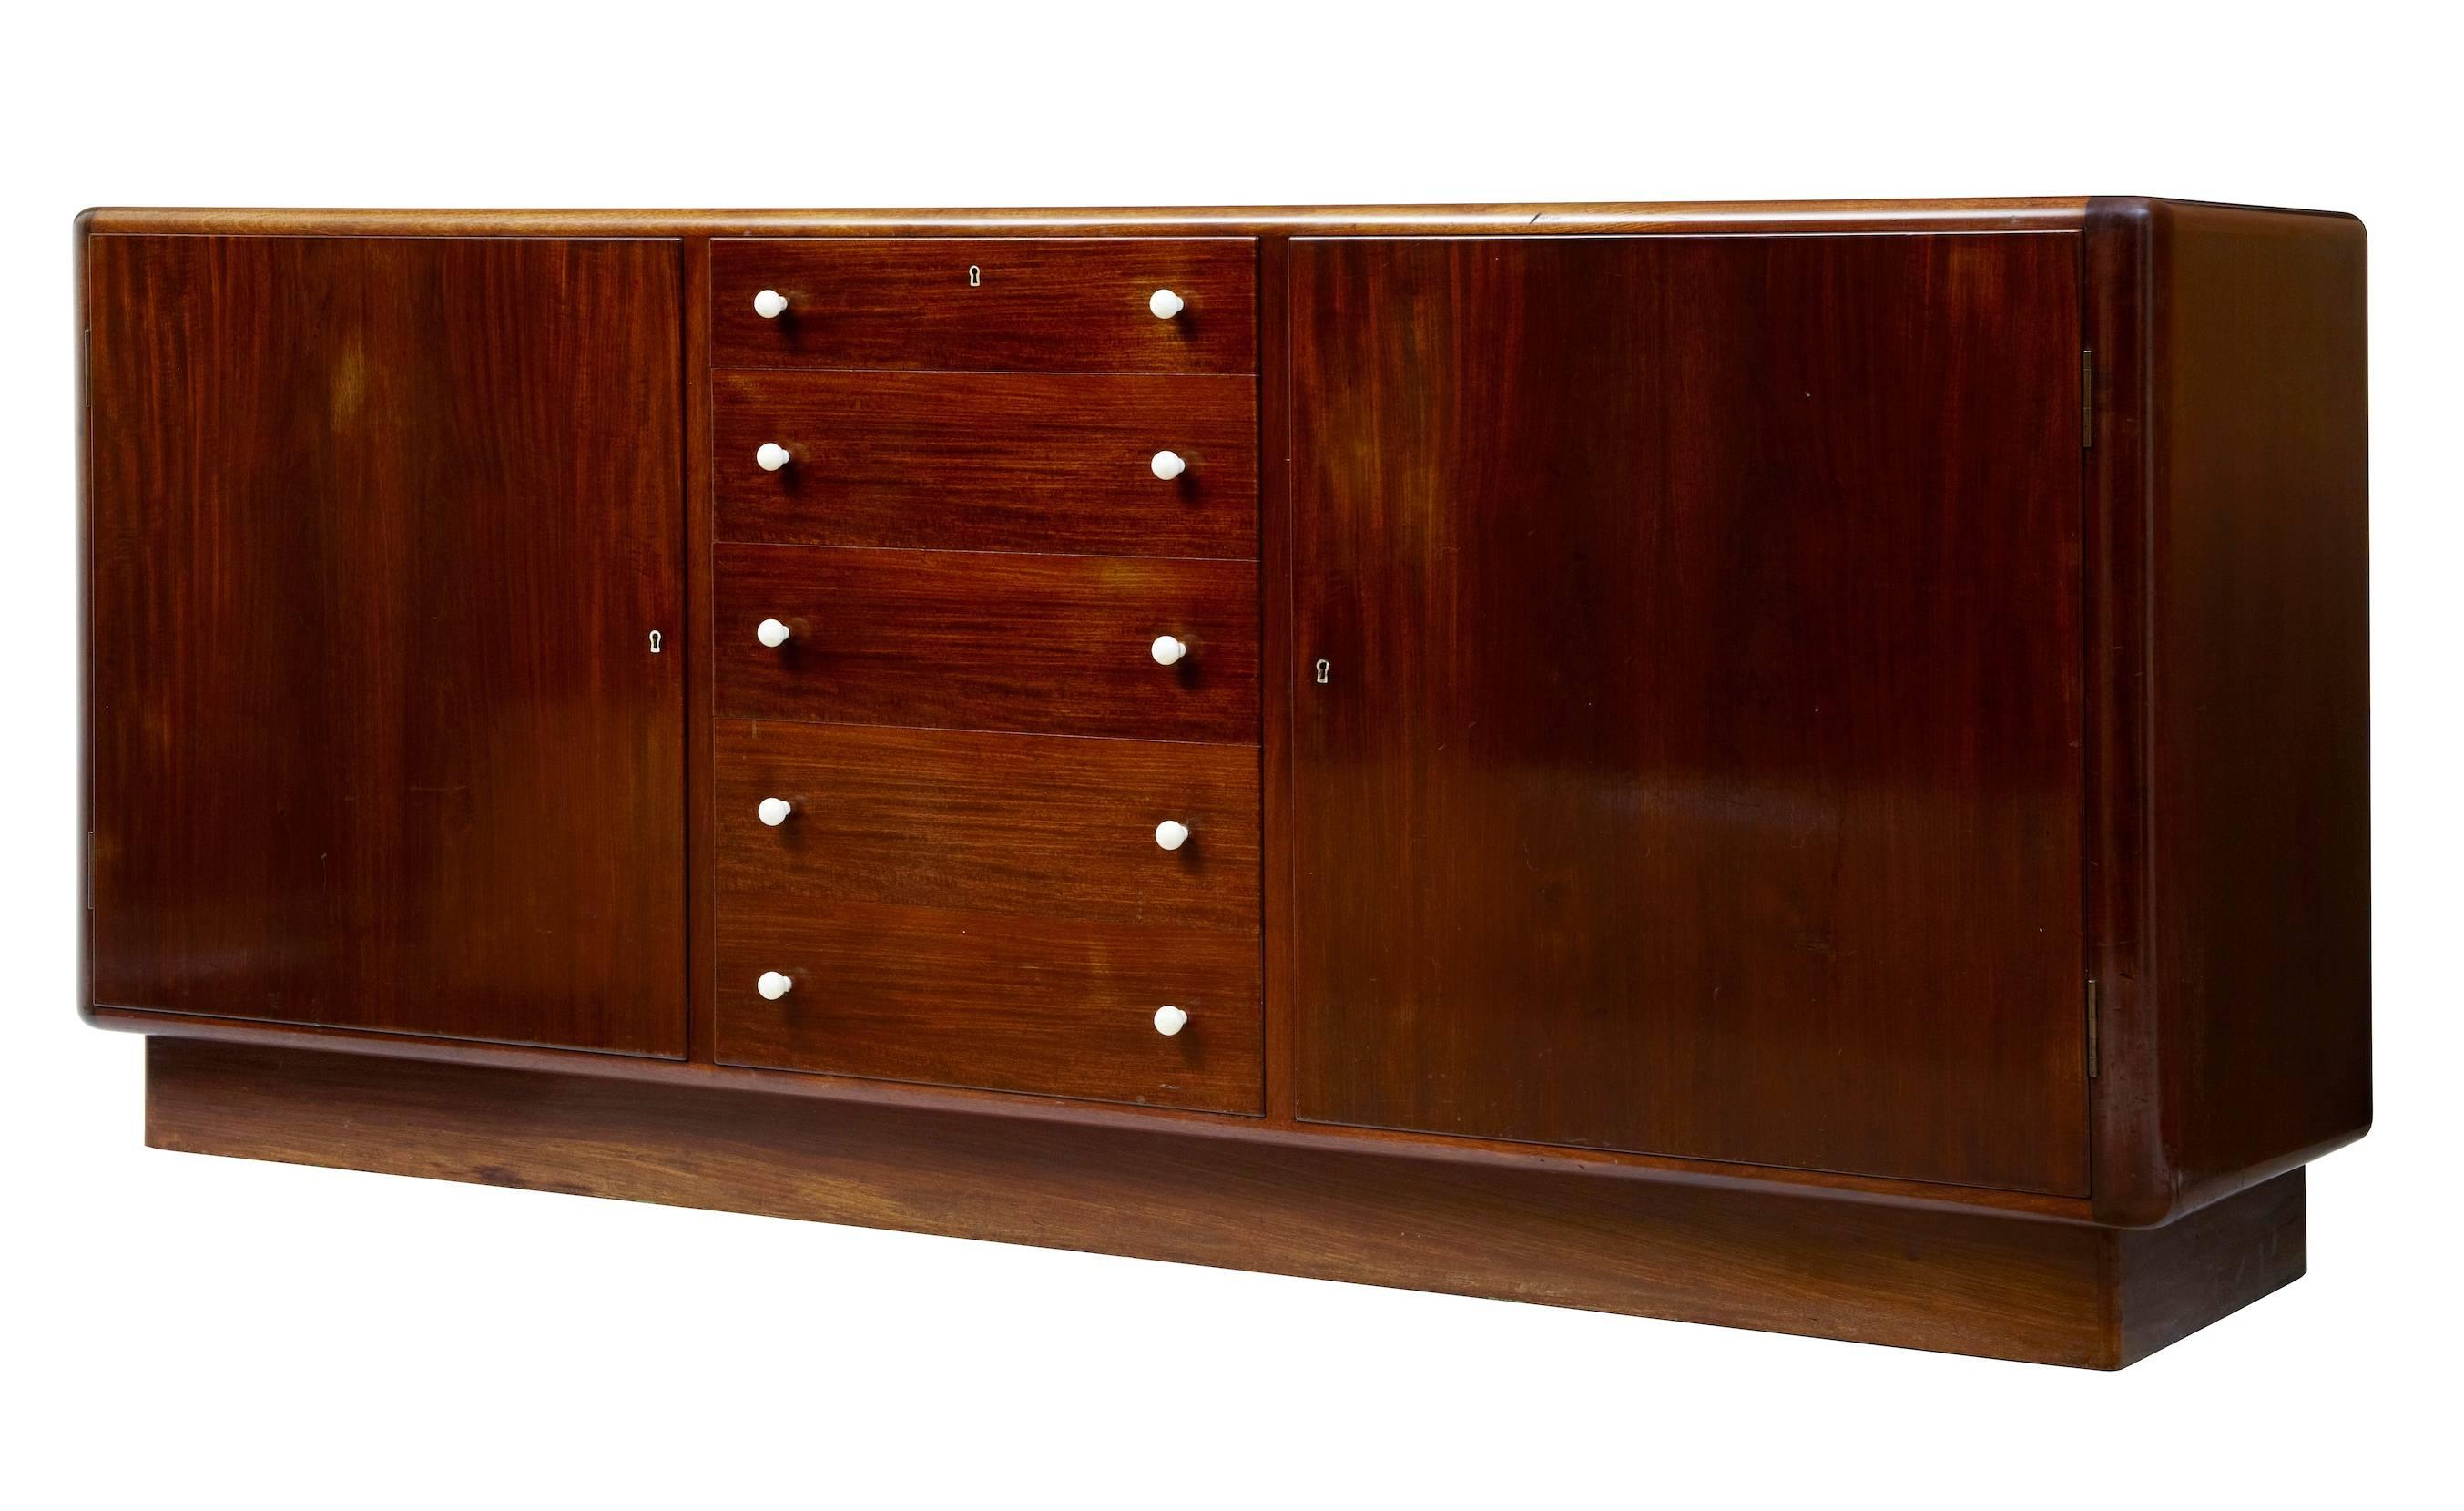 Large, 1950s Danish Mahogany Sideboard
Good quality Danish sideboard, circa 1950.
Curved form edges with white plastic knobs.
A bank of five drawers, two of which are felt lined for cutlery are flanked either side by a single door cupboard. Two